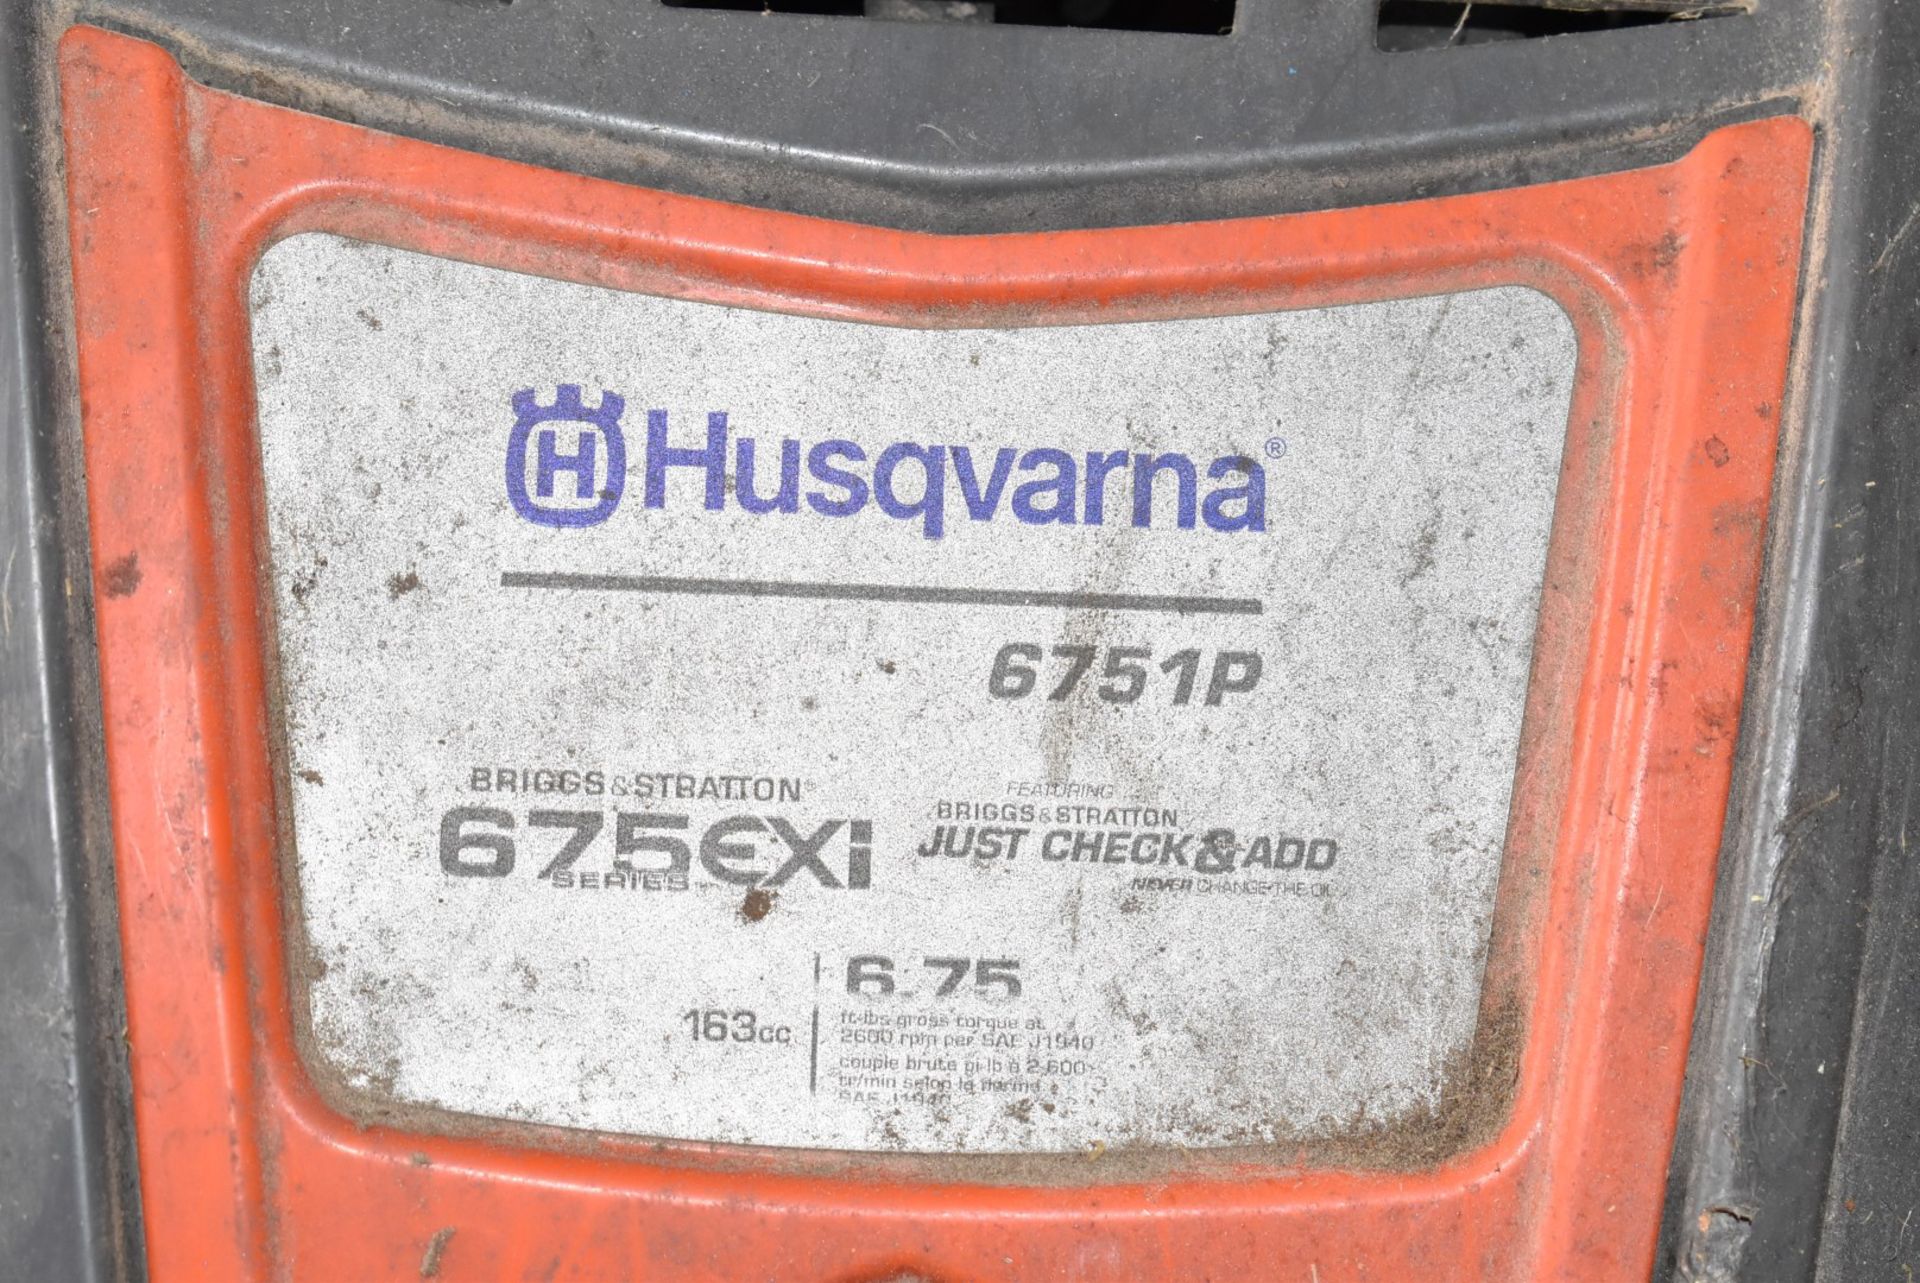 HUSQVARNA 6751P LAWN MOWER WITH BRIGGS & STRATTON 675EXI 163 CC ENGINE, S/N N/A - Image 3 of 3